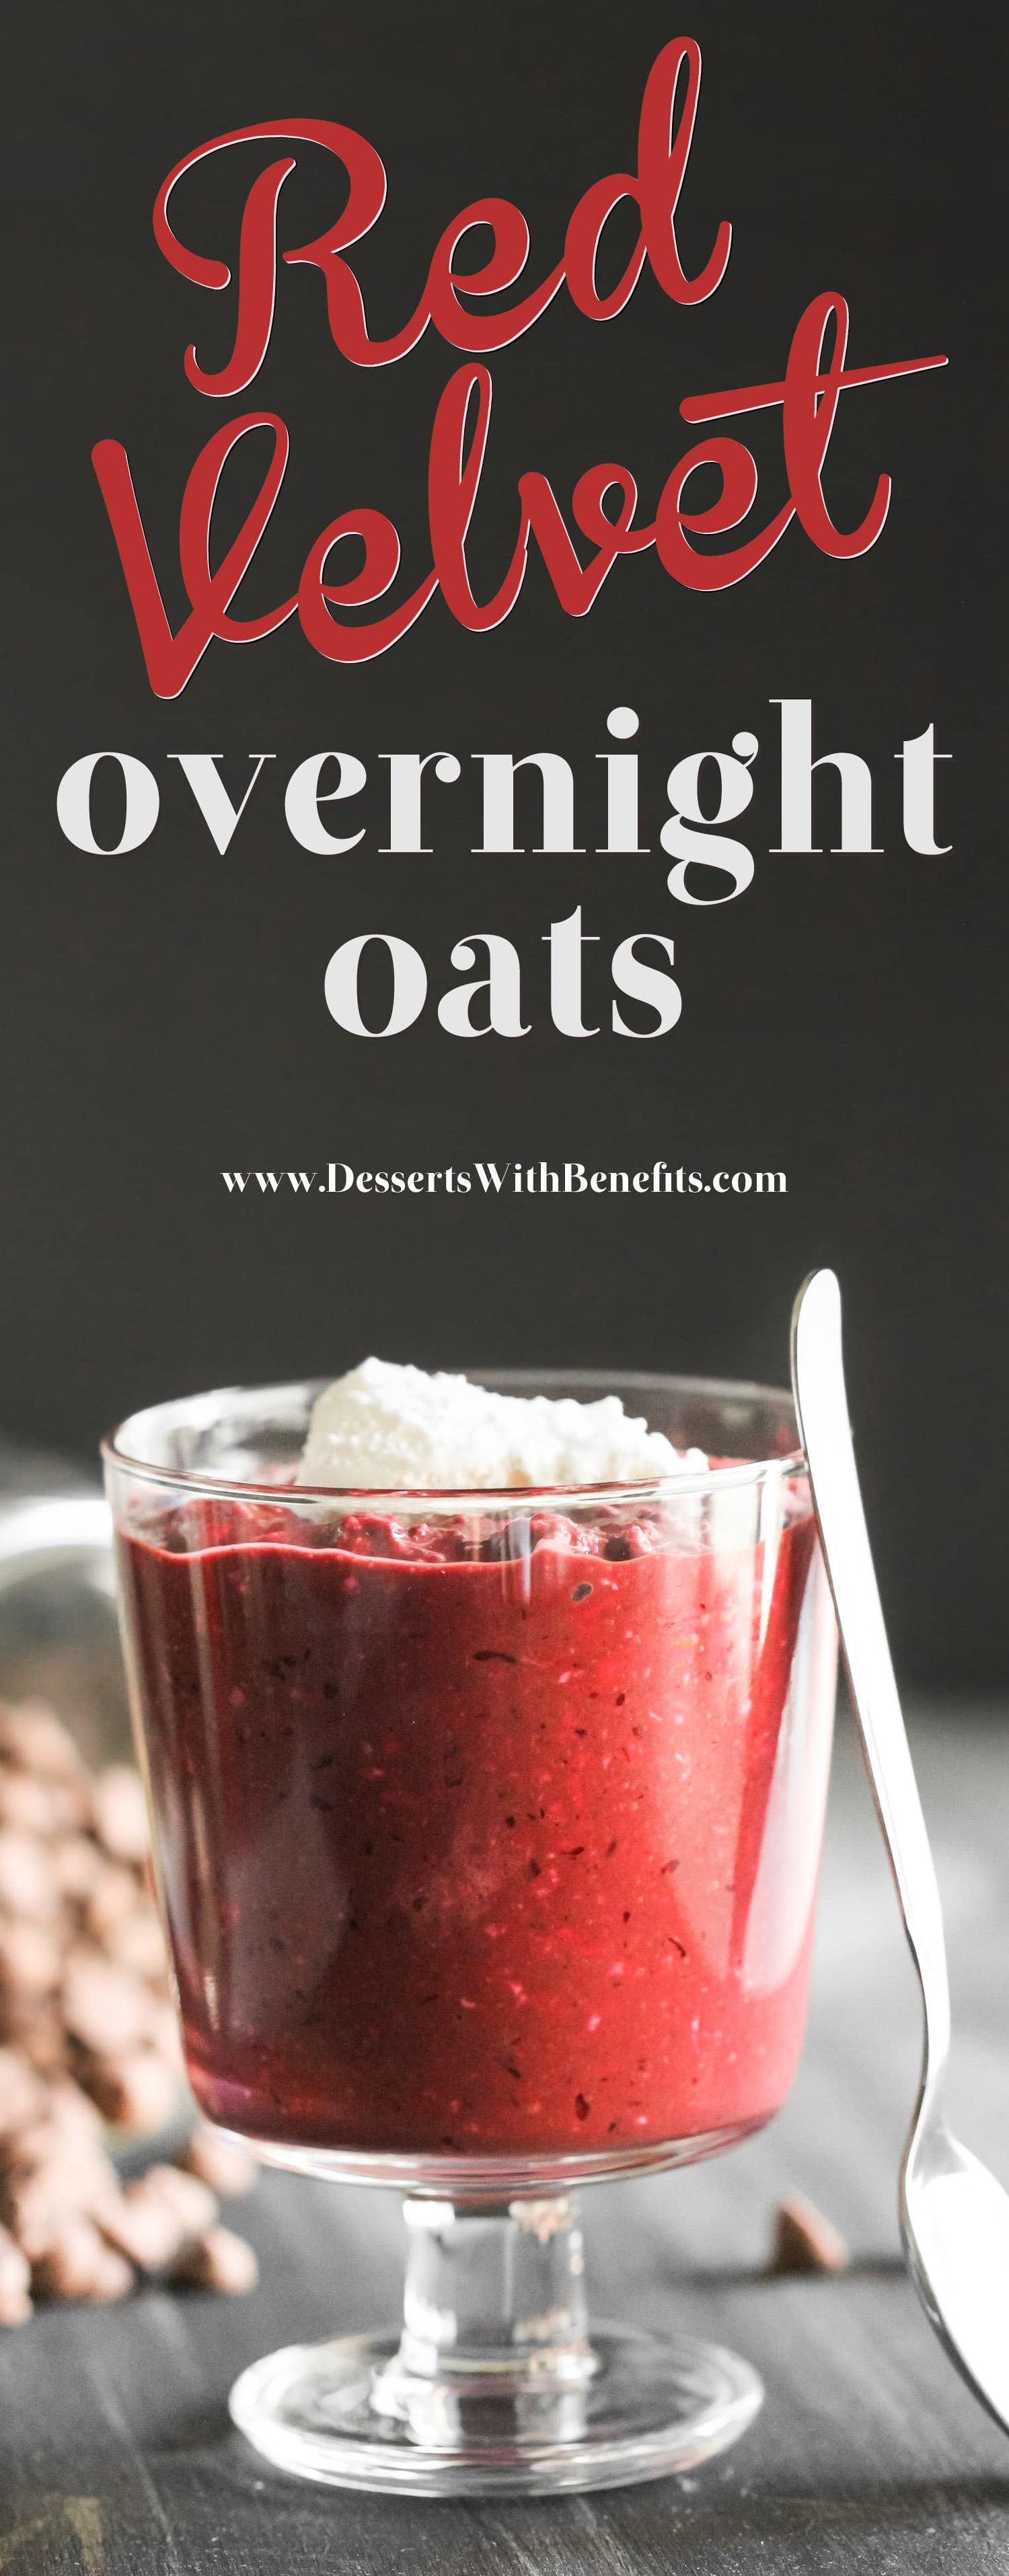 Have dessert for breakfast with these Healthy Red Velvet Overnight Dessert Oats! This single serving recipe is all natural (no artificial food dyes here) sugar free, high fiber, gluten free, dairy free, and vegan. Satisfy your morning sweet tooth while getting in some nutrition! Healthy Dessert Recipes with low calorie, low fat, low carb, and high protein options at the Desserts With Benefits Blog.